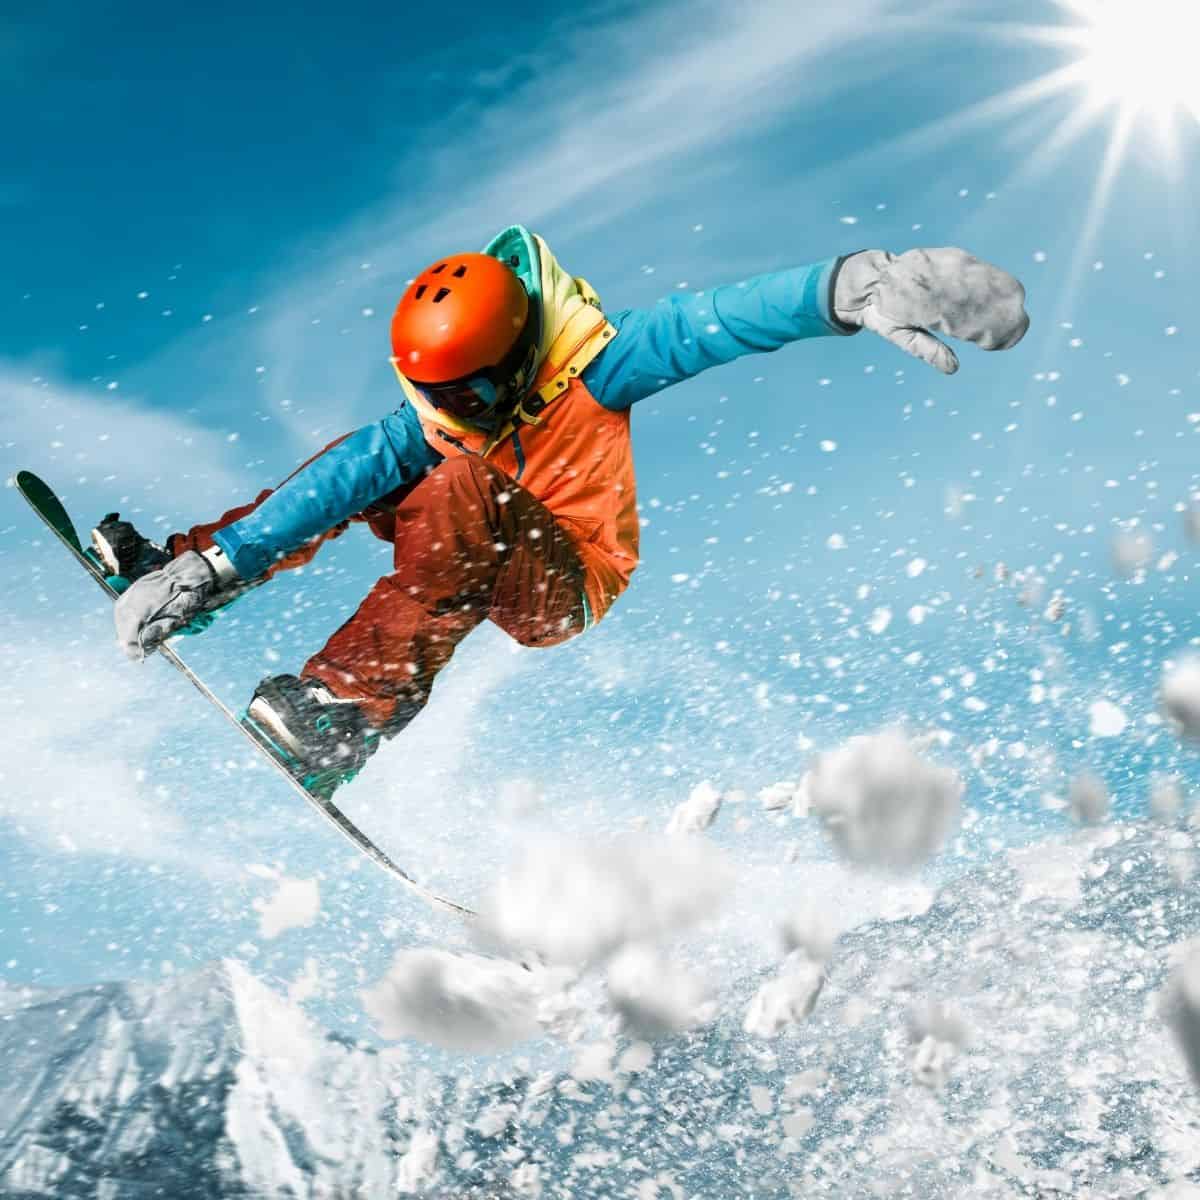 The Best Snowboard Movies and Documentaries of All Time